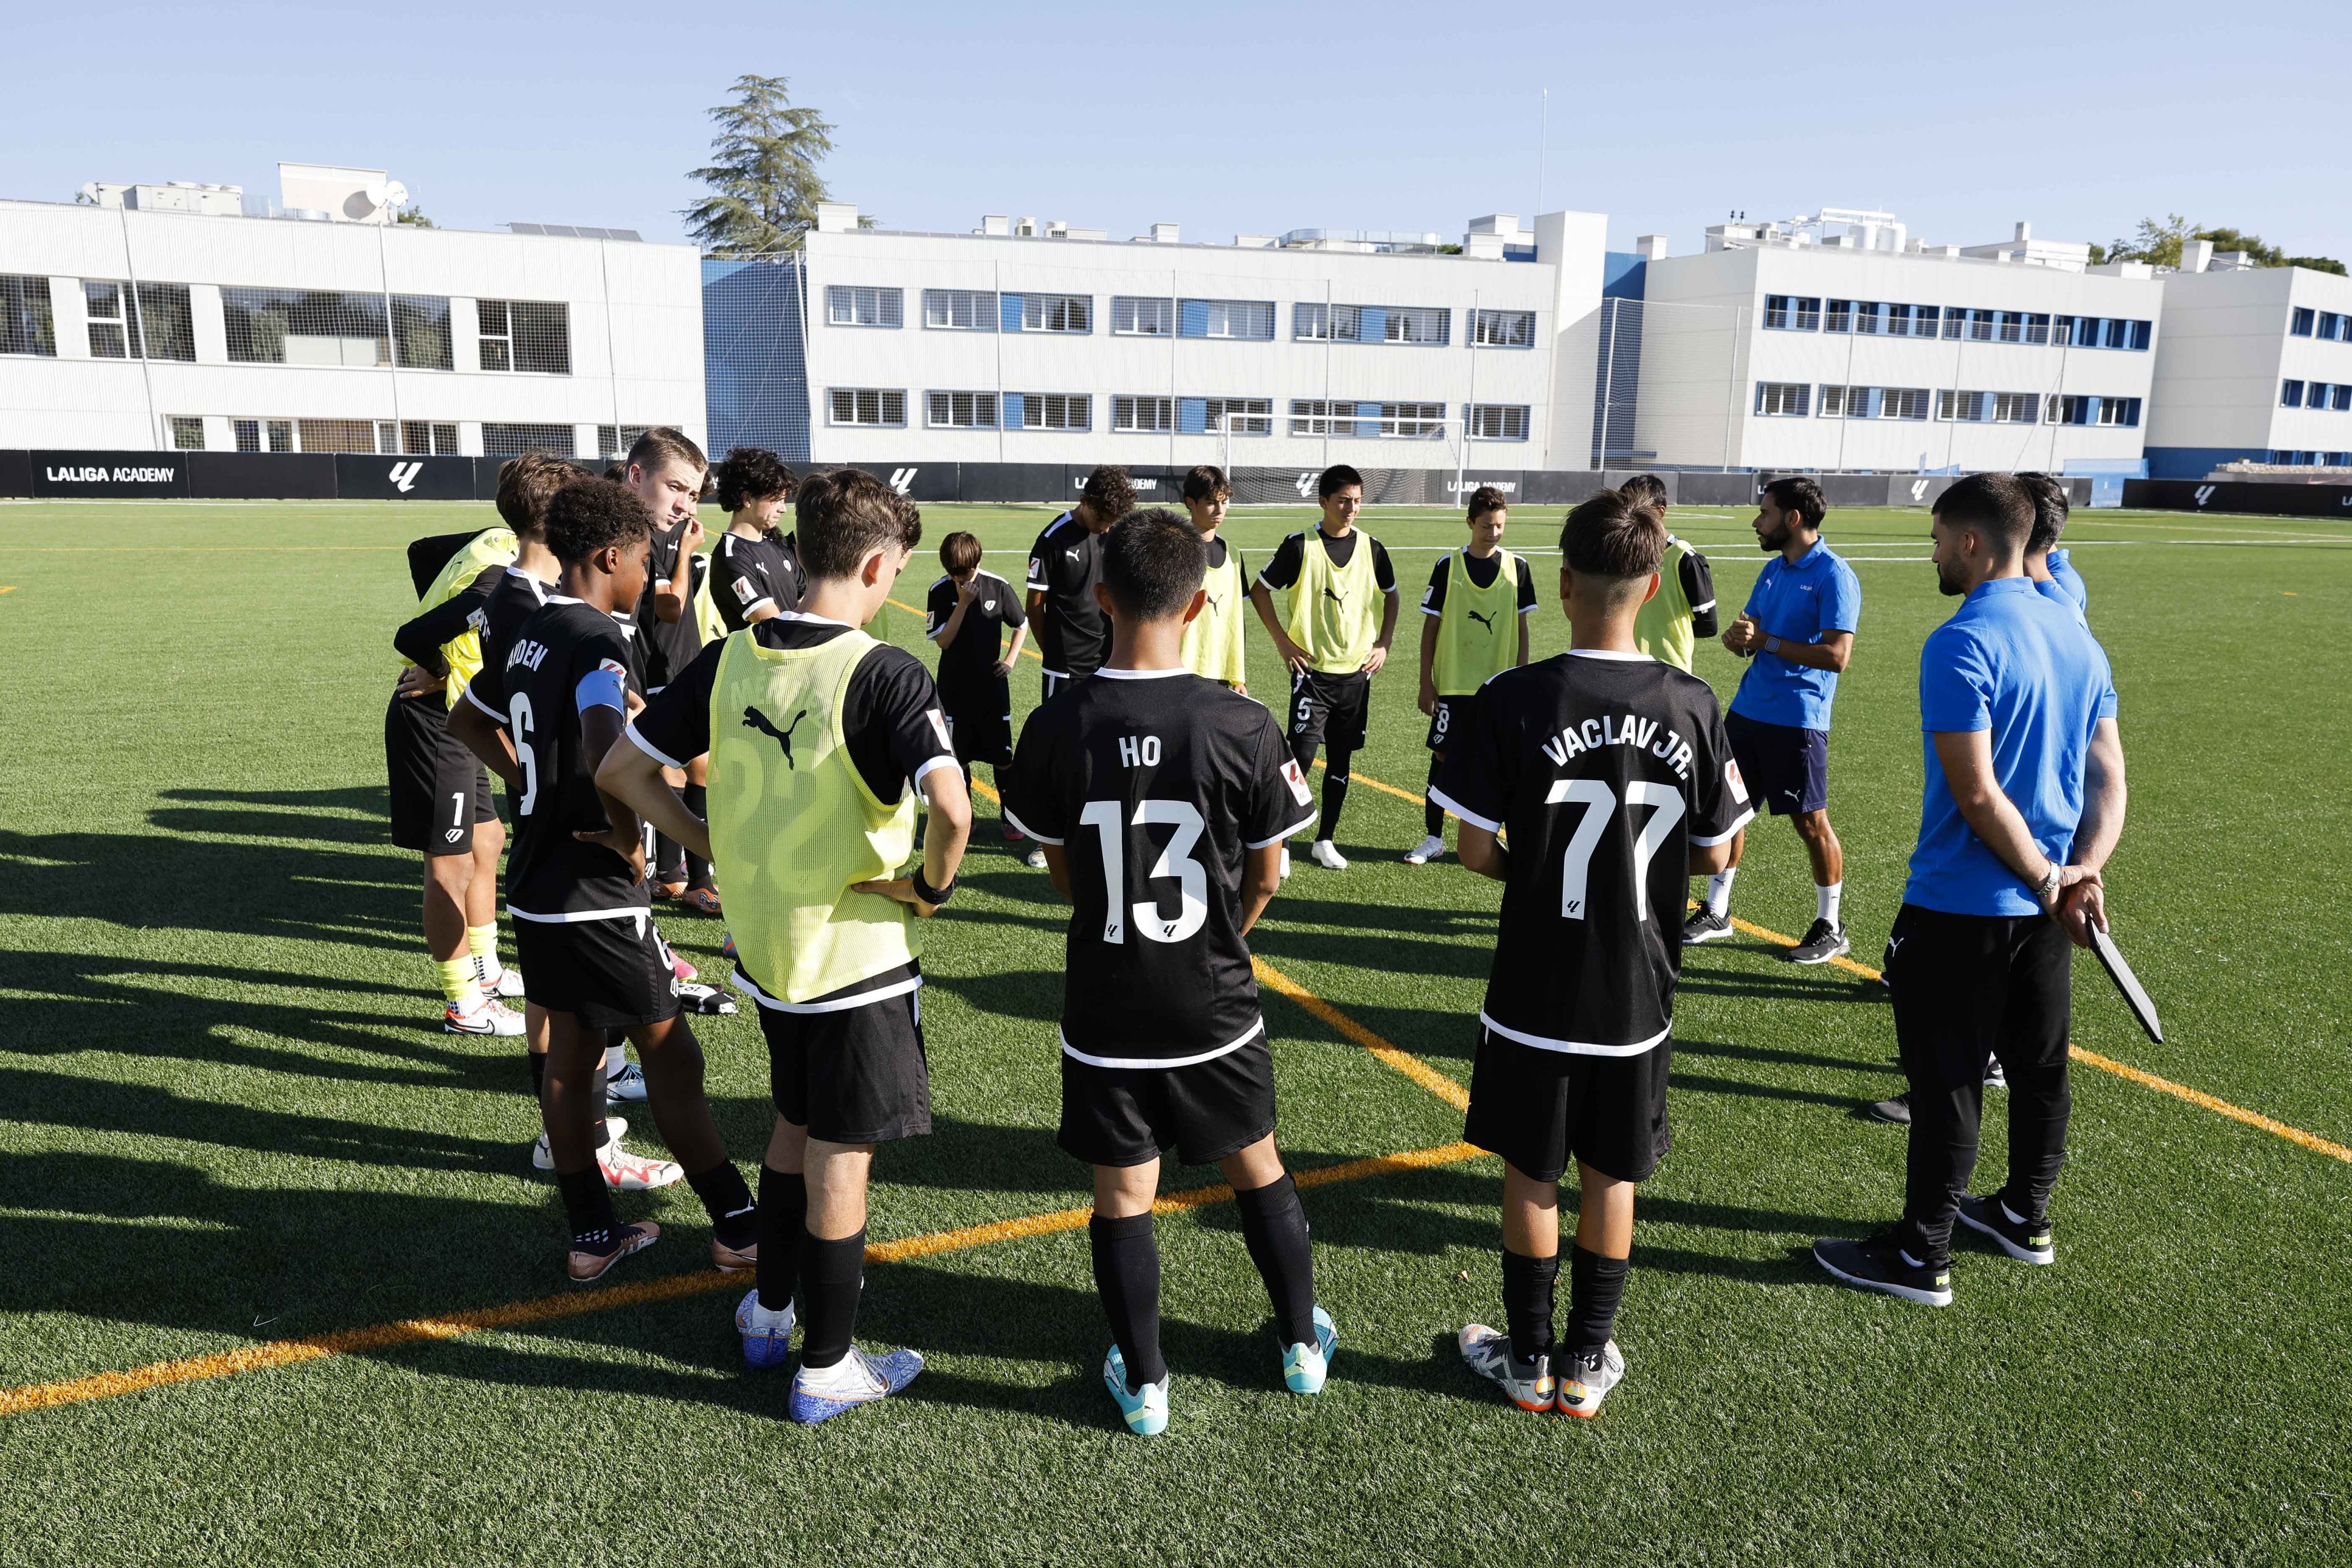 Players listen to their coach during a training session at La Liga Academy in Madrid. Photo: La Liga Academy